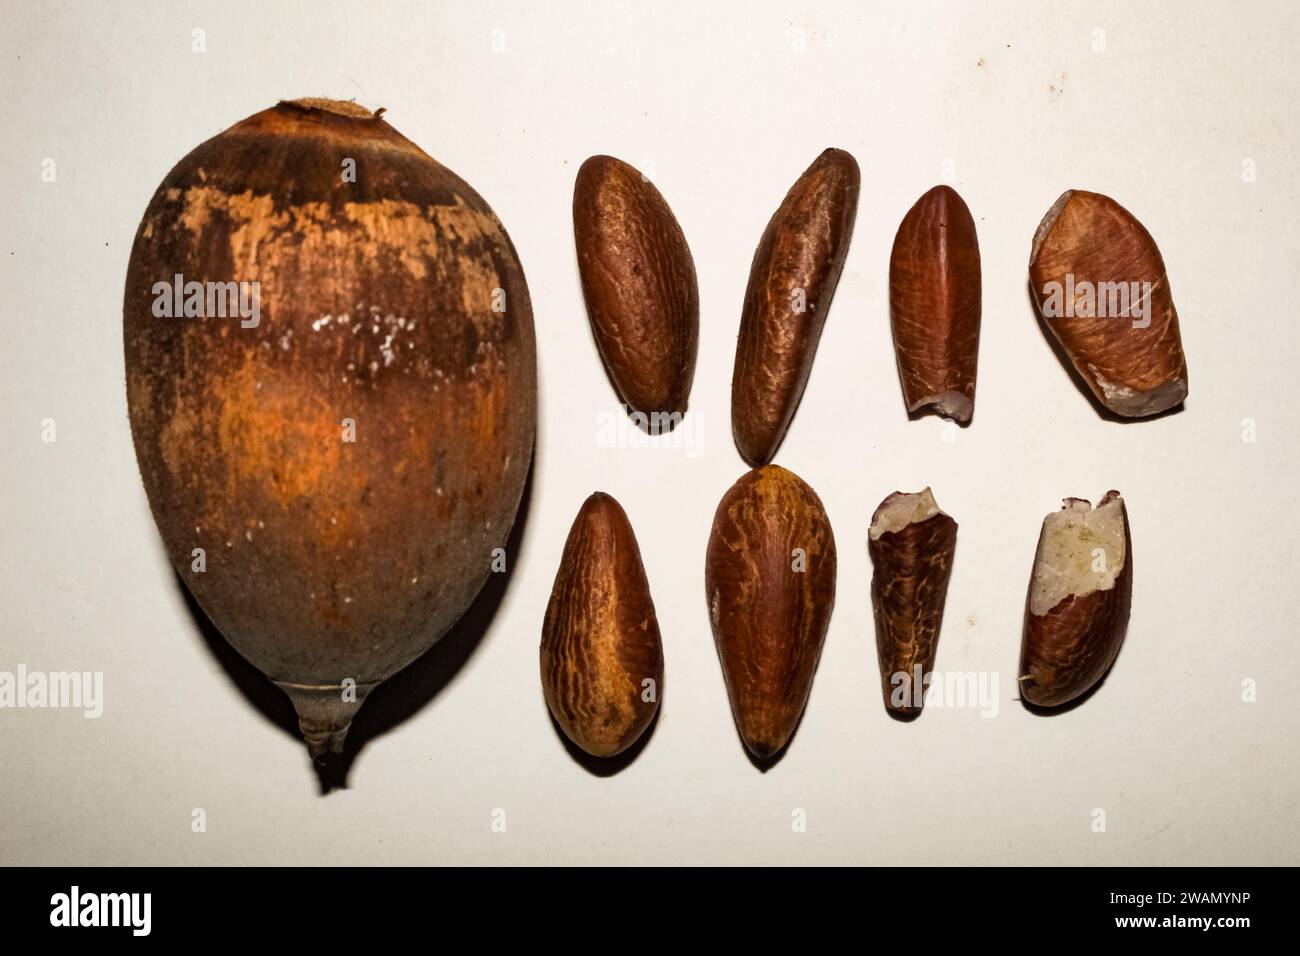 Shelled coconuts and almonds, from the babassu palm, Attalea speciosa, on a white surface Stock Photo